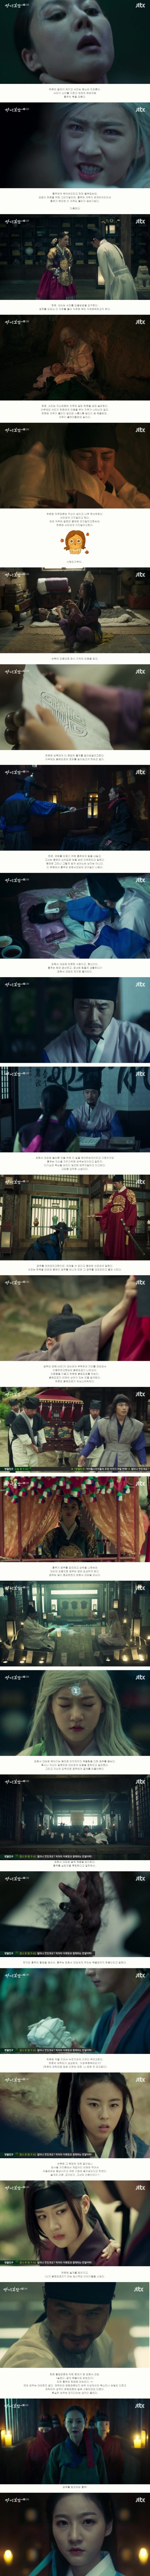 episodes 11 and 12 captures for the Korean drama 'Mirror of the Witch'